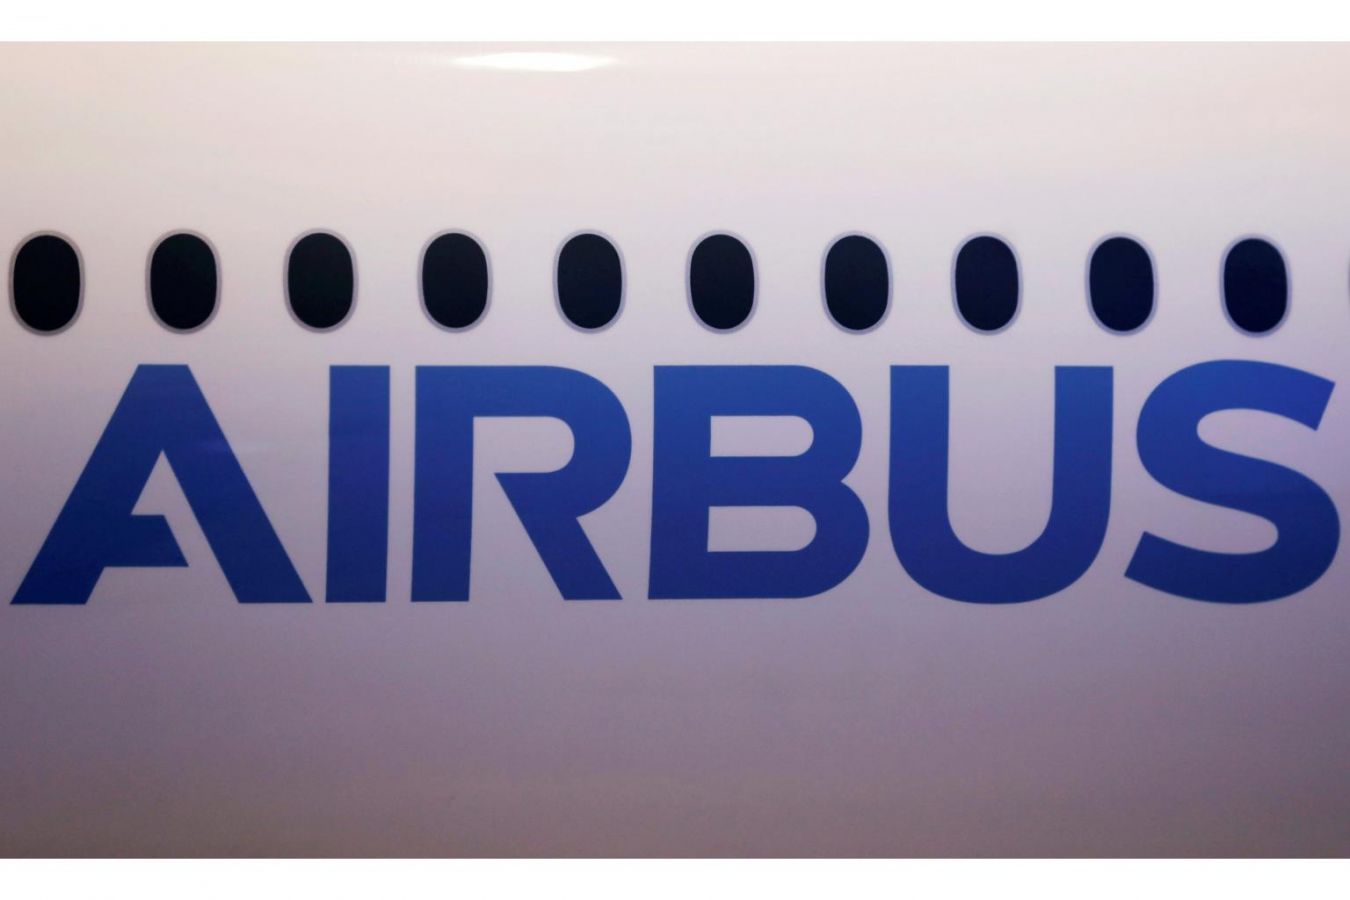 Airbus delegation in Iran to finalize deal